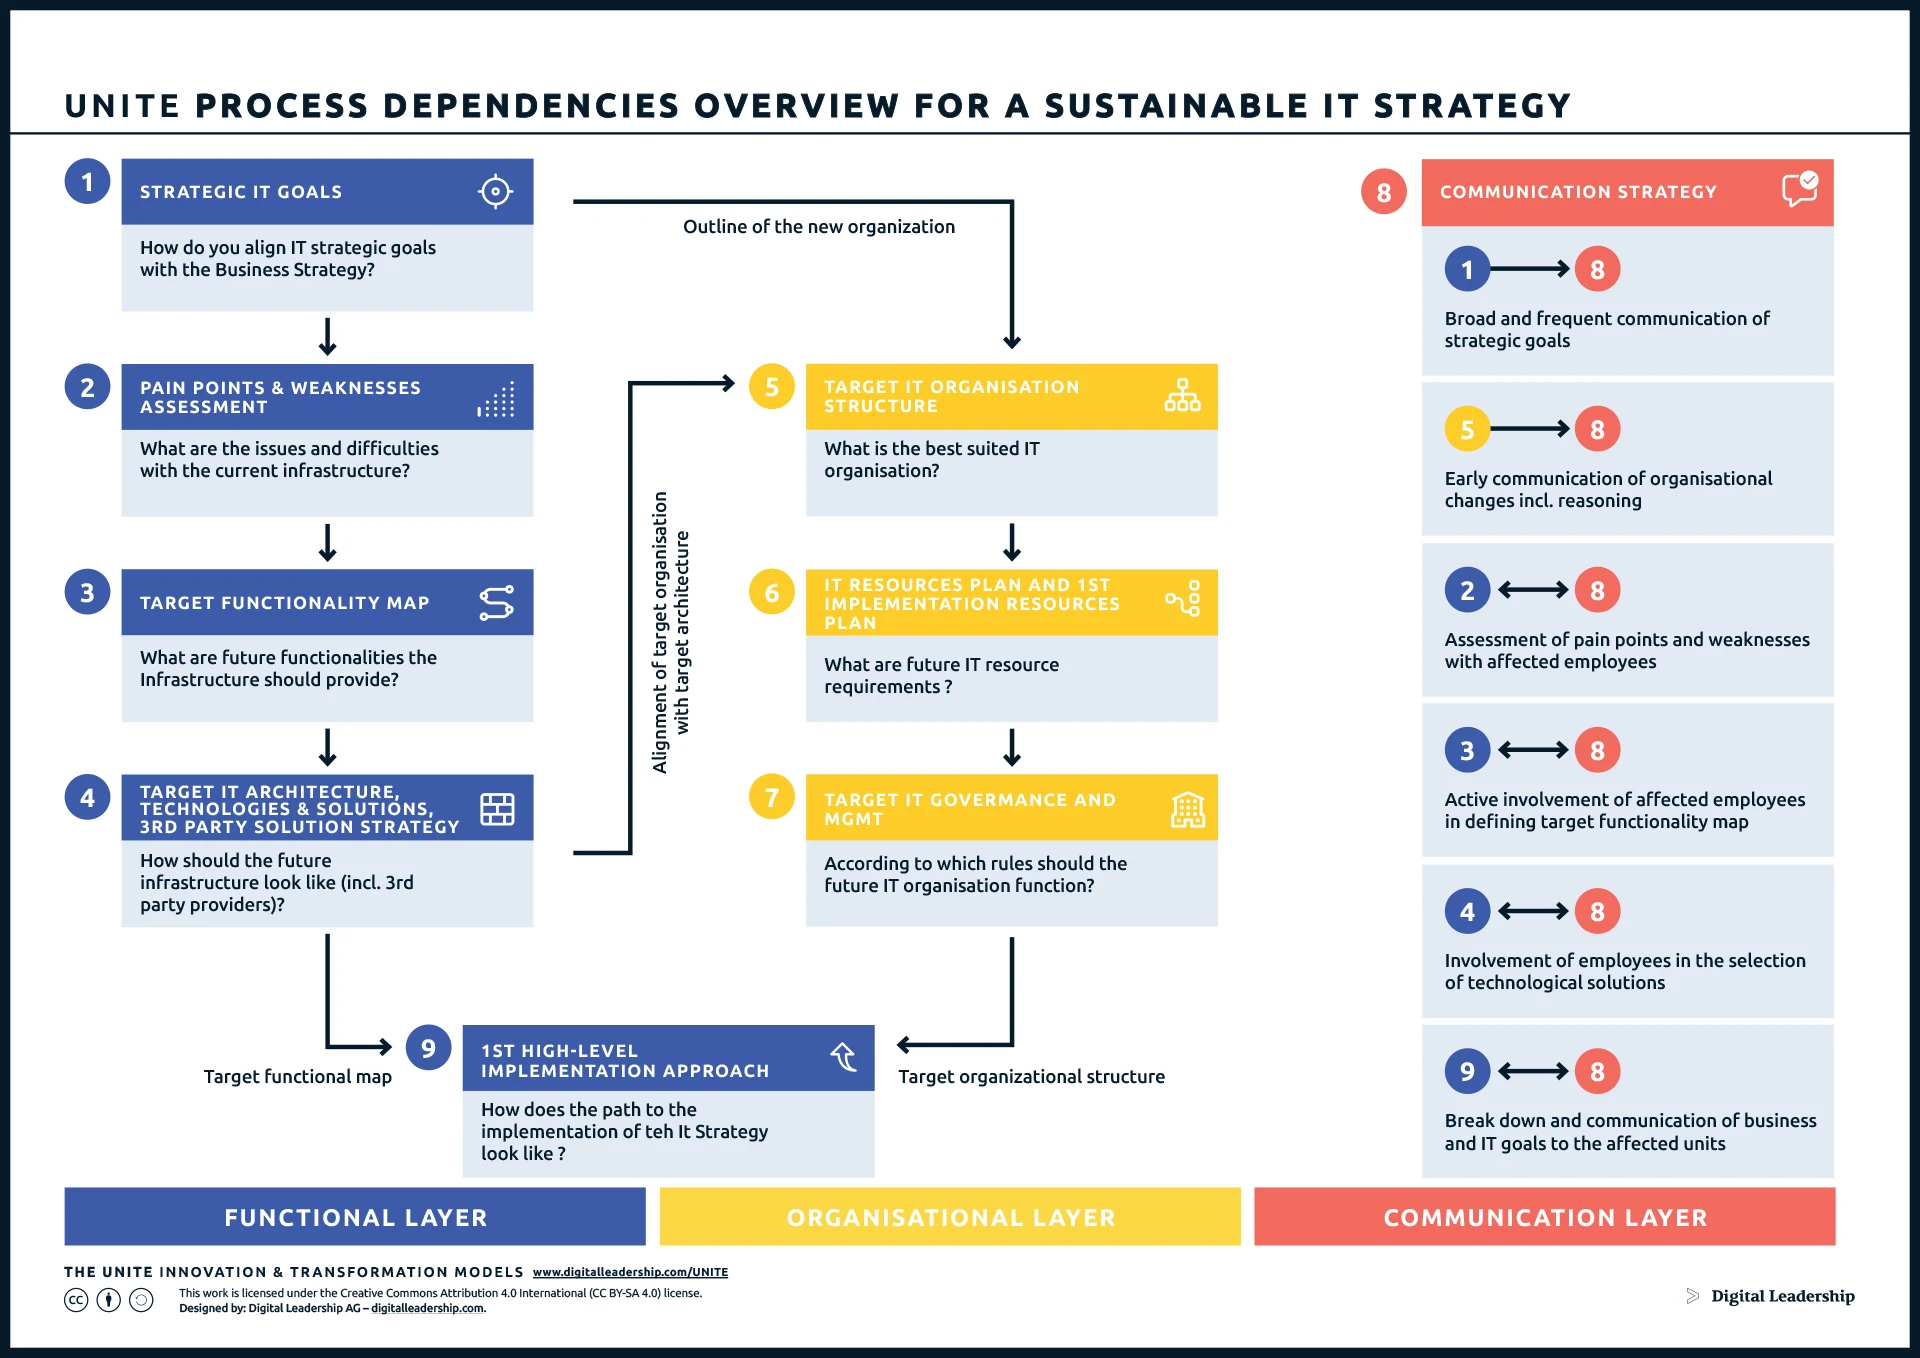 UNITE Process Dependencies Overview for a Sustainable IT Strategy